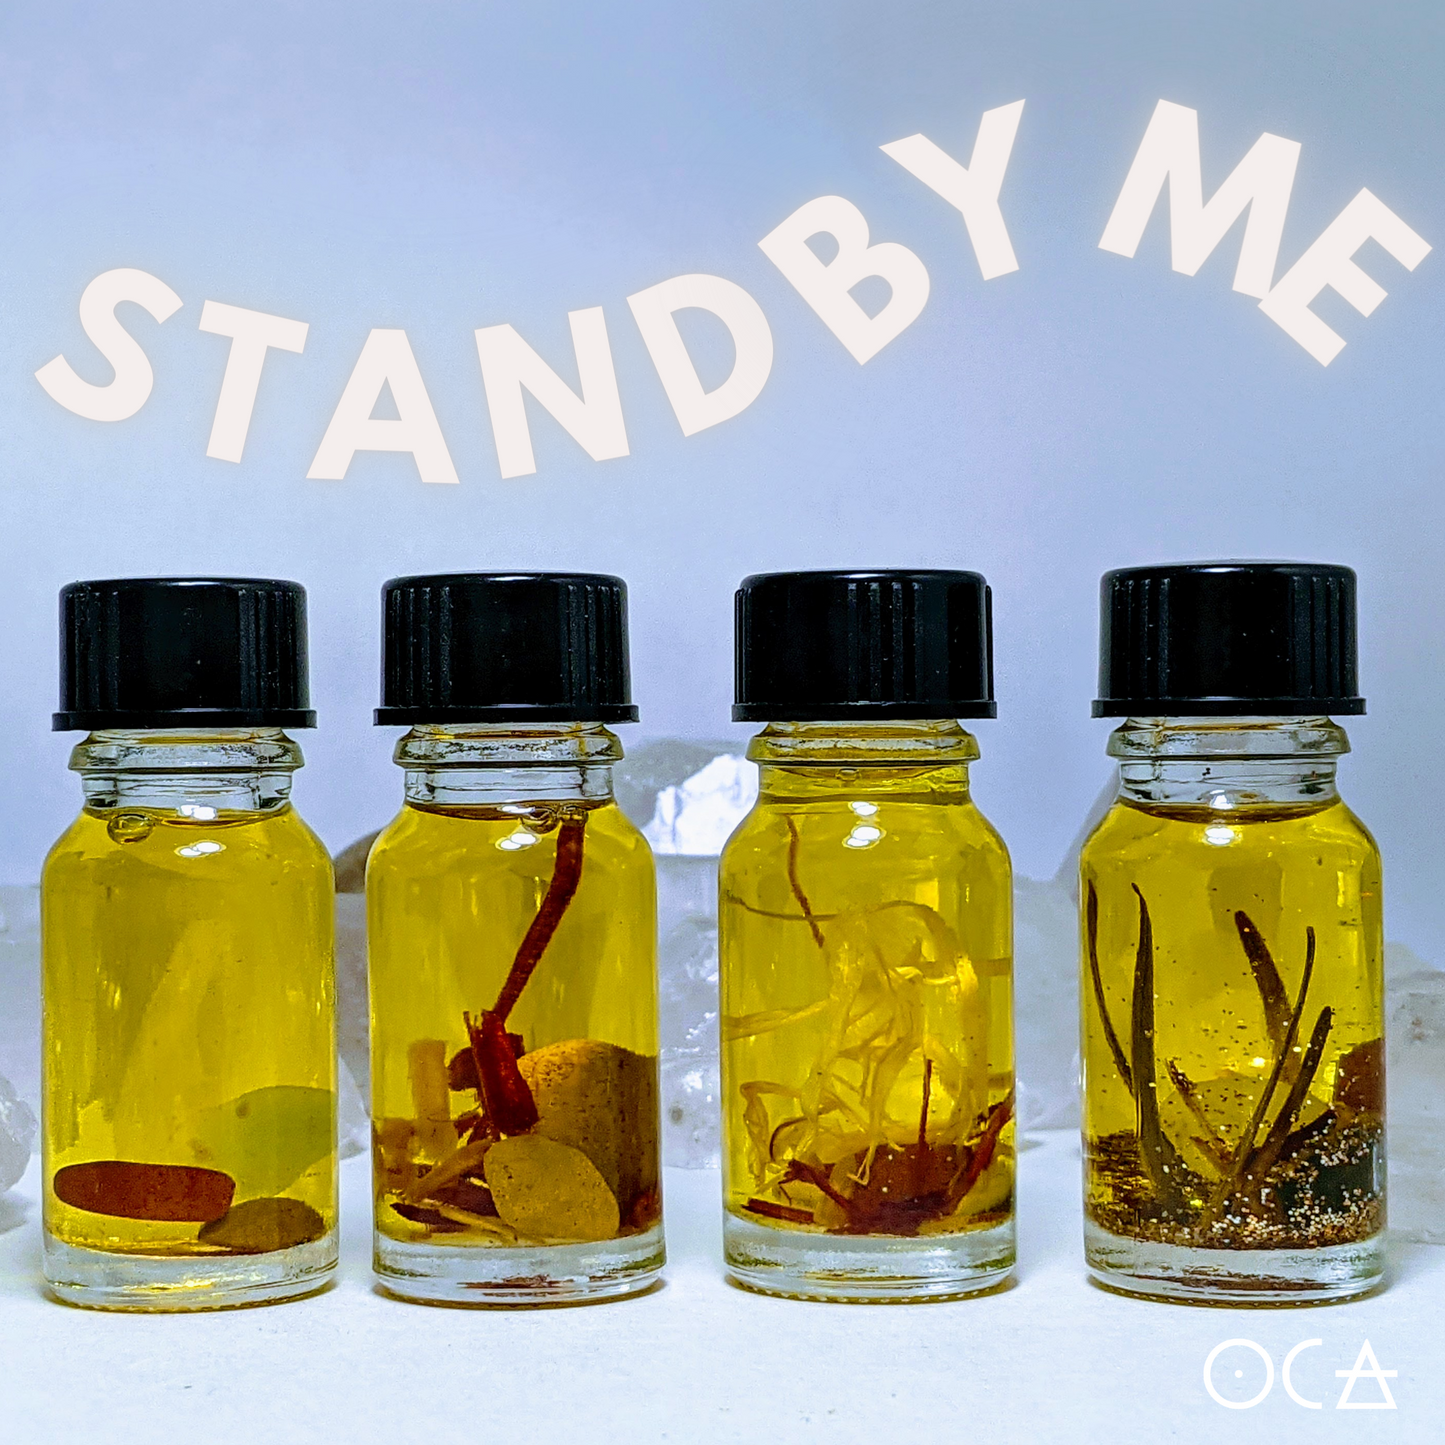 Stand By Me Set (Perfume/Cologne/Unisex)